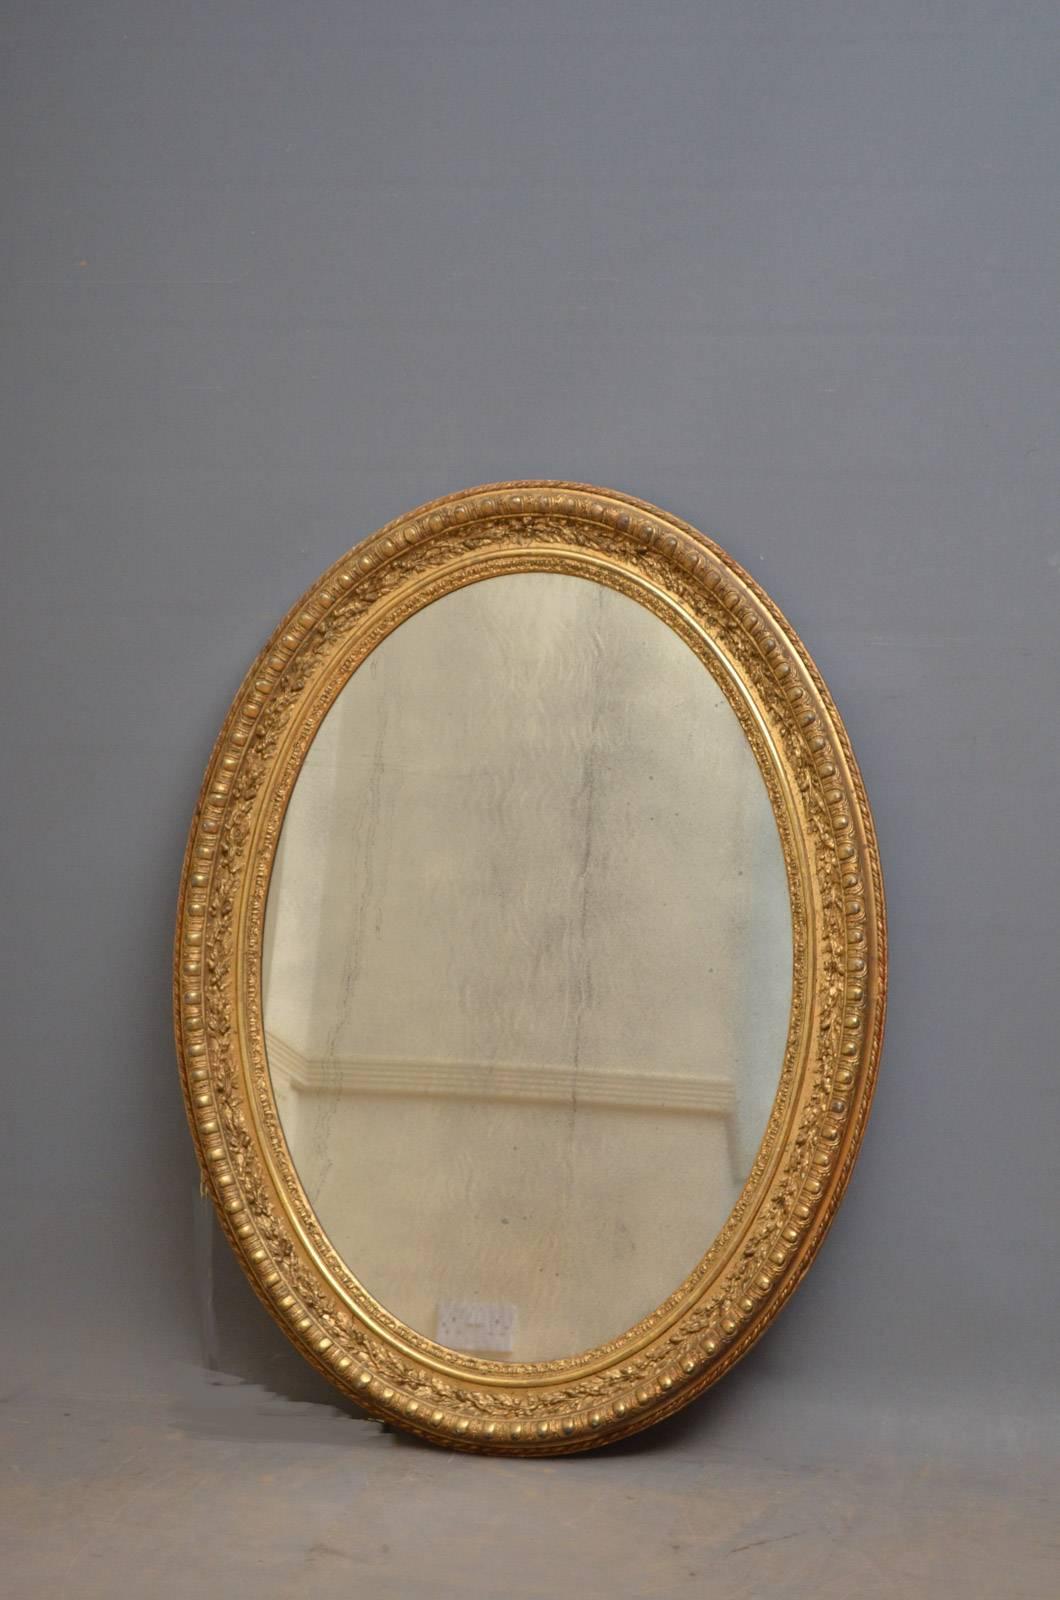 Sn4359, fabulous 19th century wall mirror of oval design, having original, foxed mirror plate in finely carved frame. This antique mirror is in original condition throughout, retaining its original glass, gilt and backboards, all in excellent